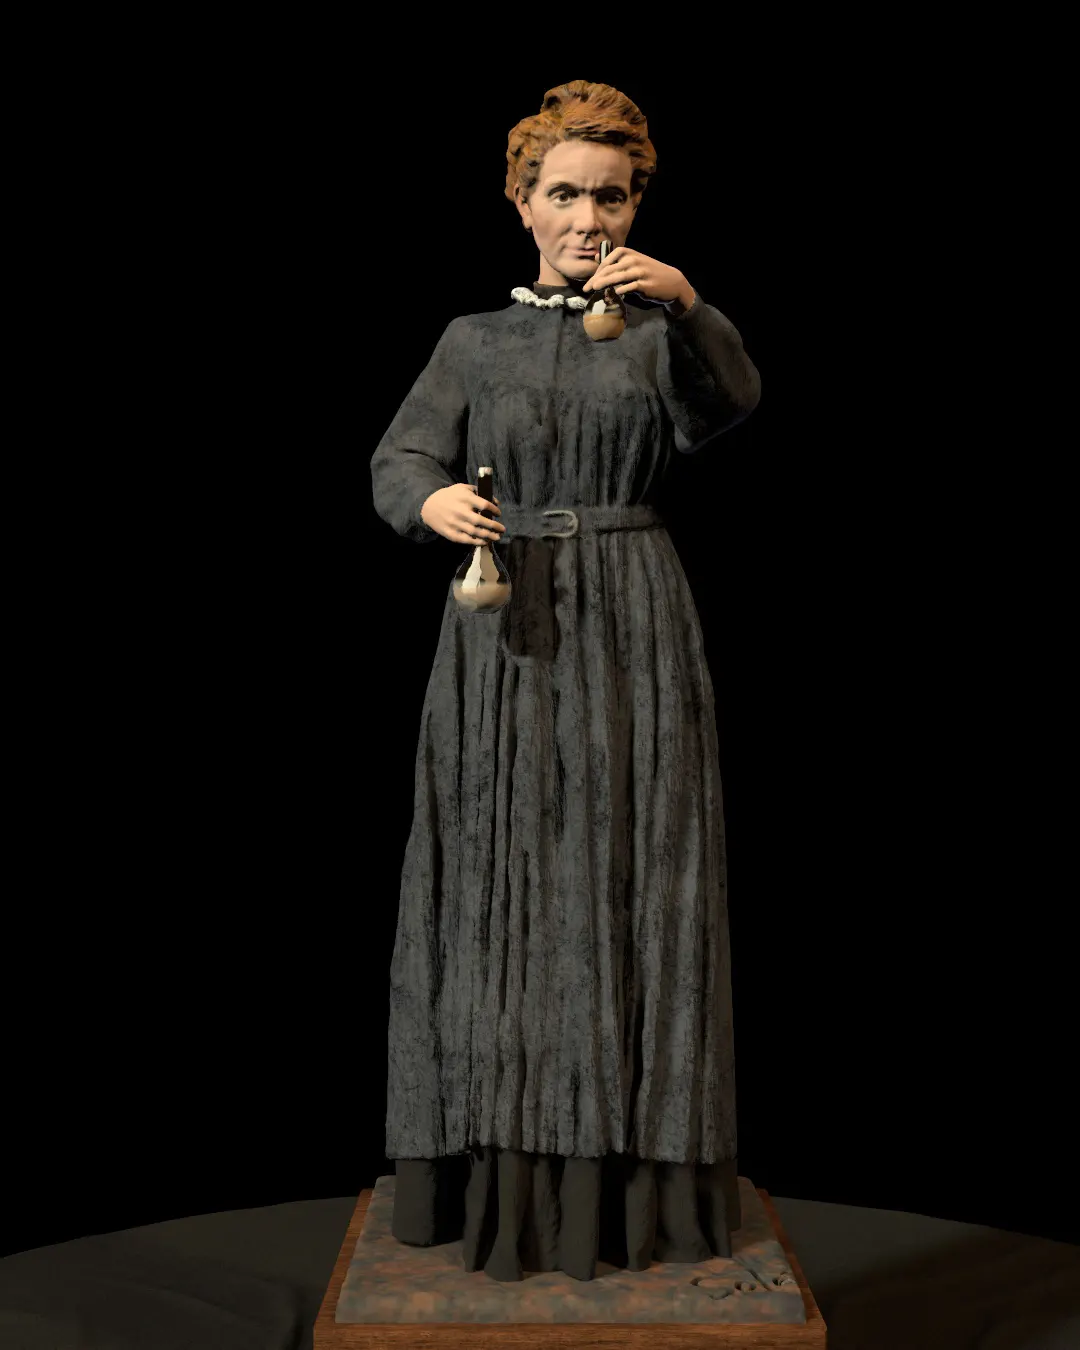 Marie-Curie-statue/Rendering-of-Marie-Curie-statue-modeled-by-Emil-Sole-1.webp